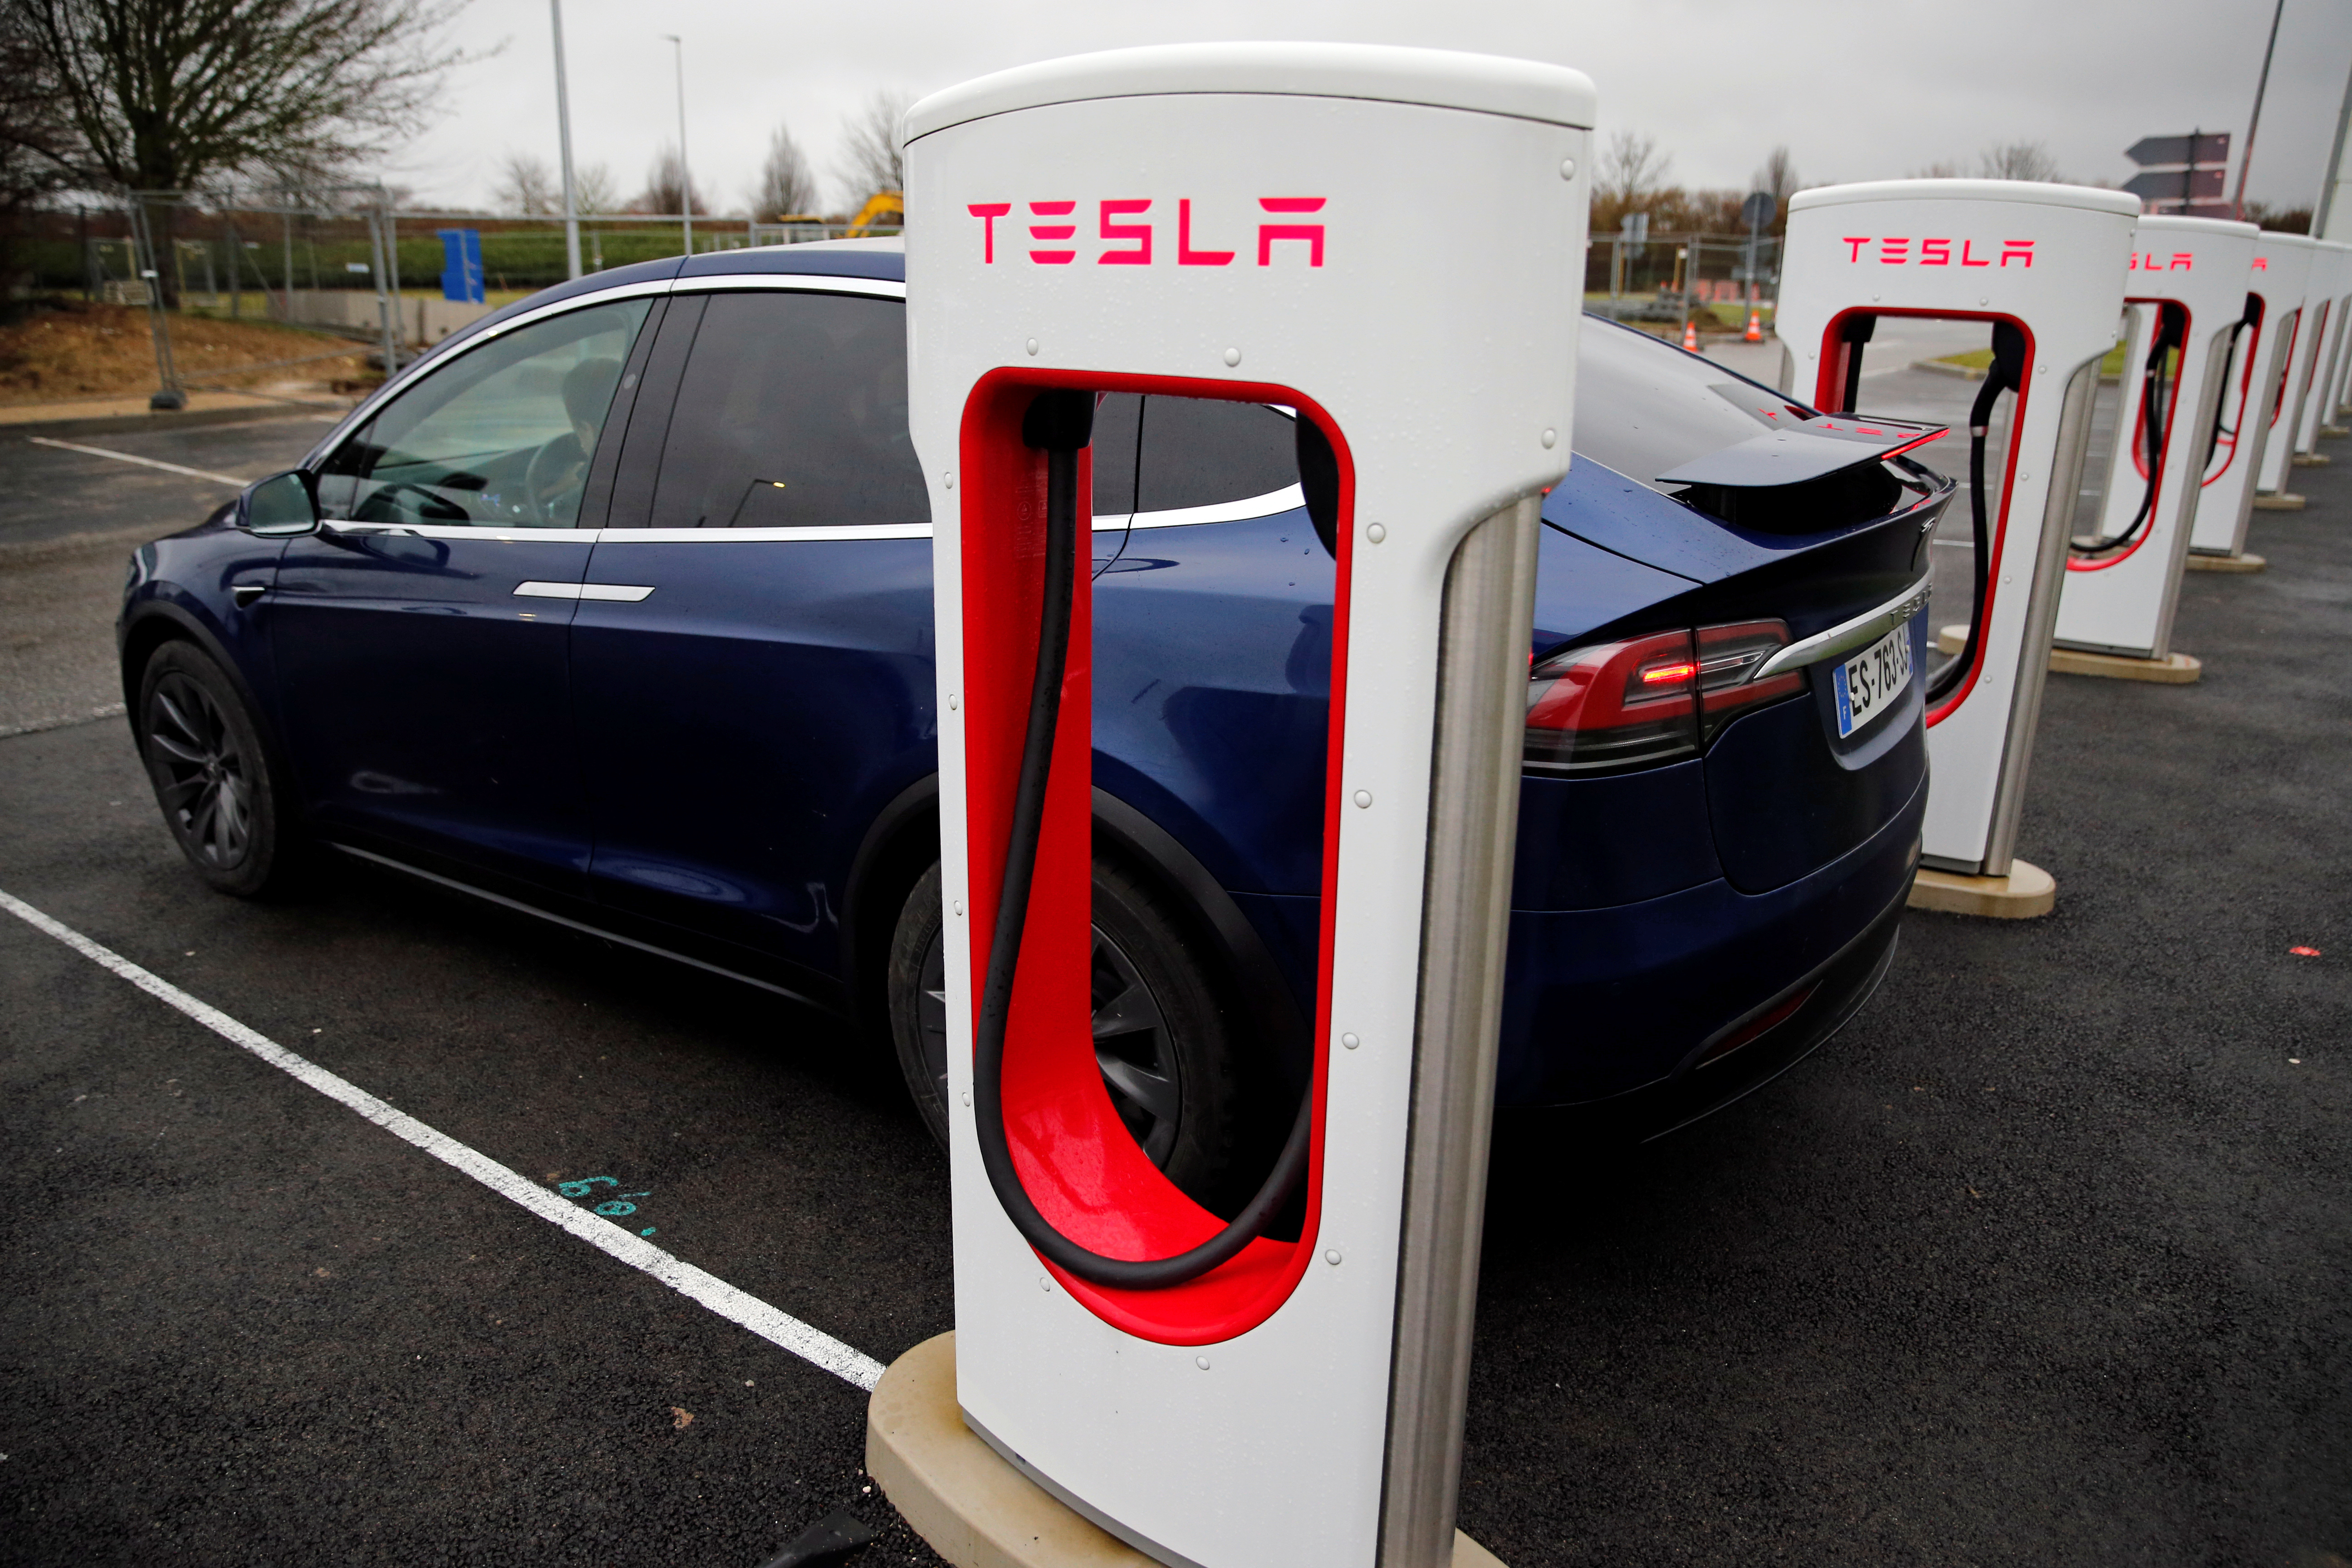 A driver recharges the battery of his Tesla car at a Tesla Super Charging station in a petrol station on the highway in Sailly-Flibeaucourt